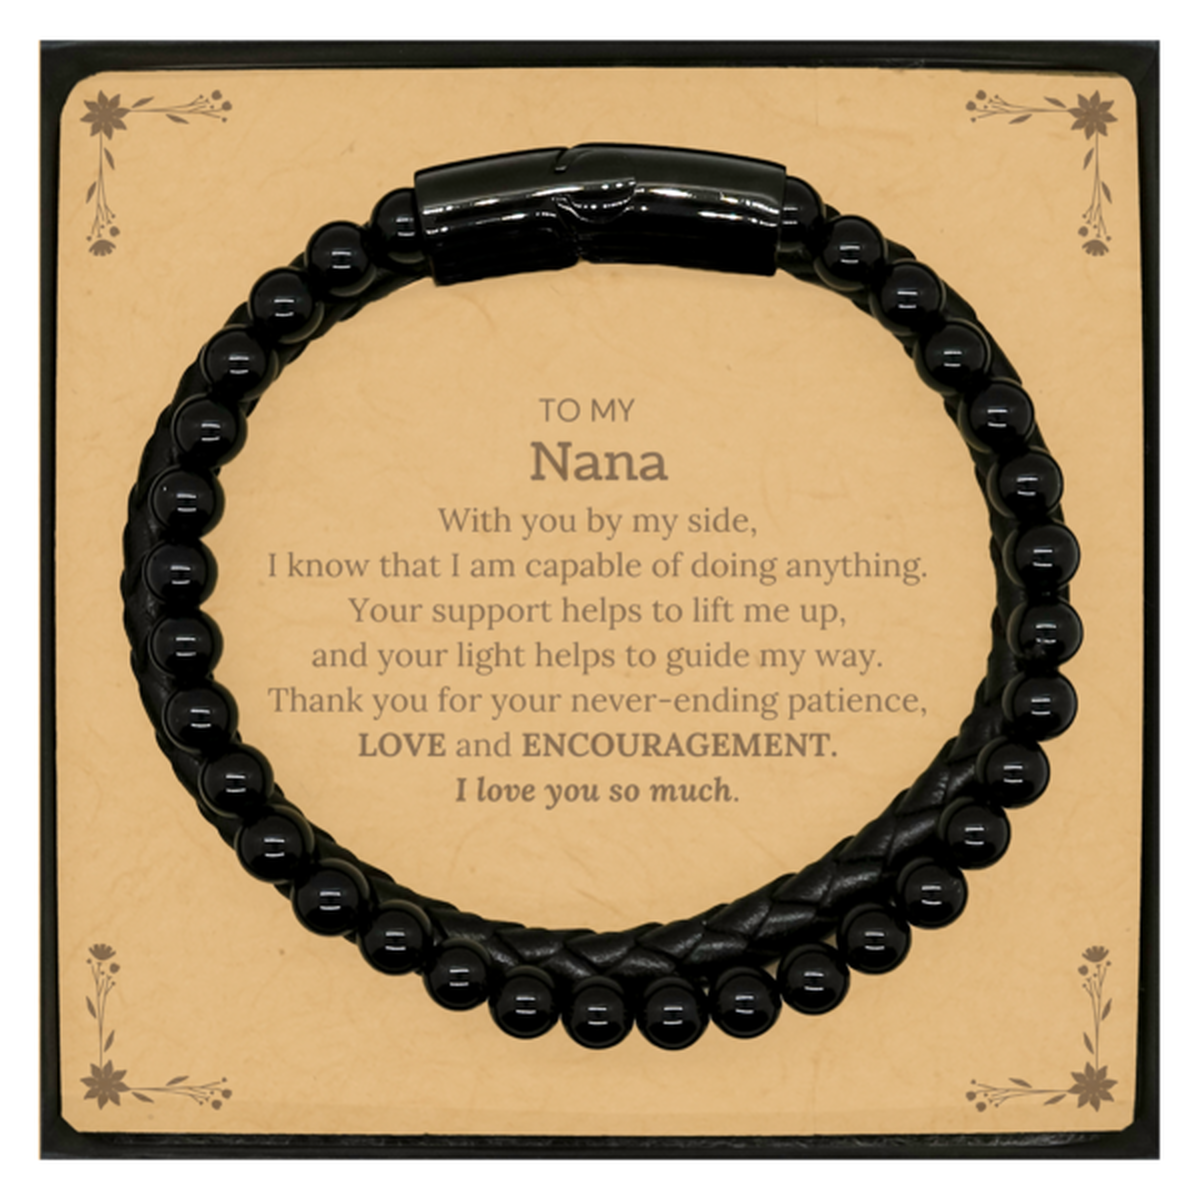 Appreciation Nana Stone Leather Bracelets Gifts, To My Nana Birthday Christmas Wedding Keepsake Gifts for Nana With you by my side, I know that I am capable of doing anything. I love you so much